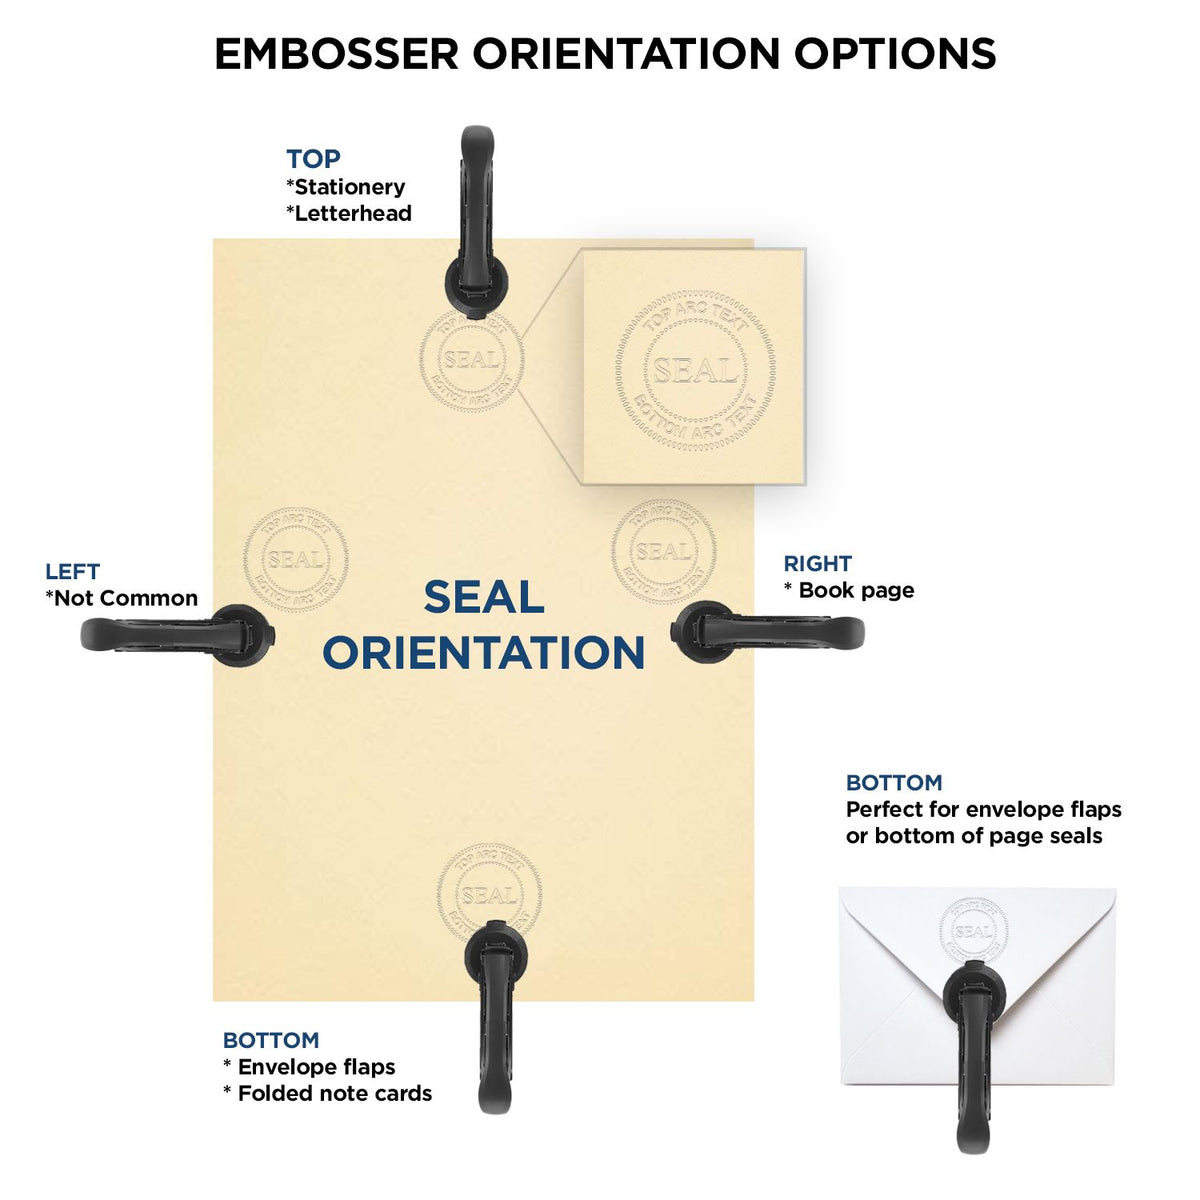 An infographic for the Heavy Duty Cast Iron Hawaii Land Surveyor Seal Embosser showing embosser orientation, this is showing examples of a top, bottom, right and left insert.